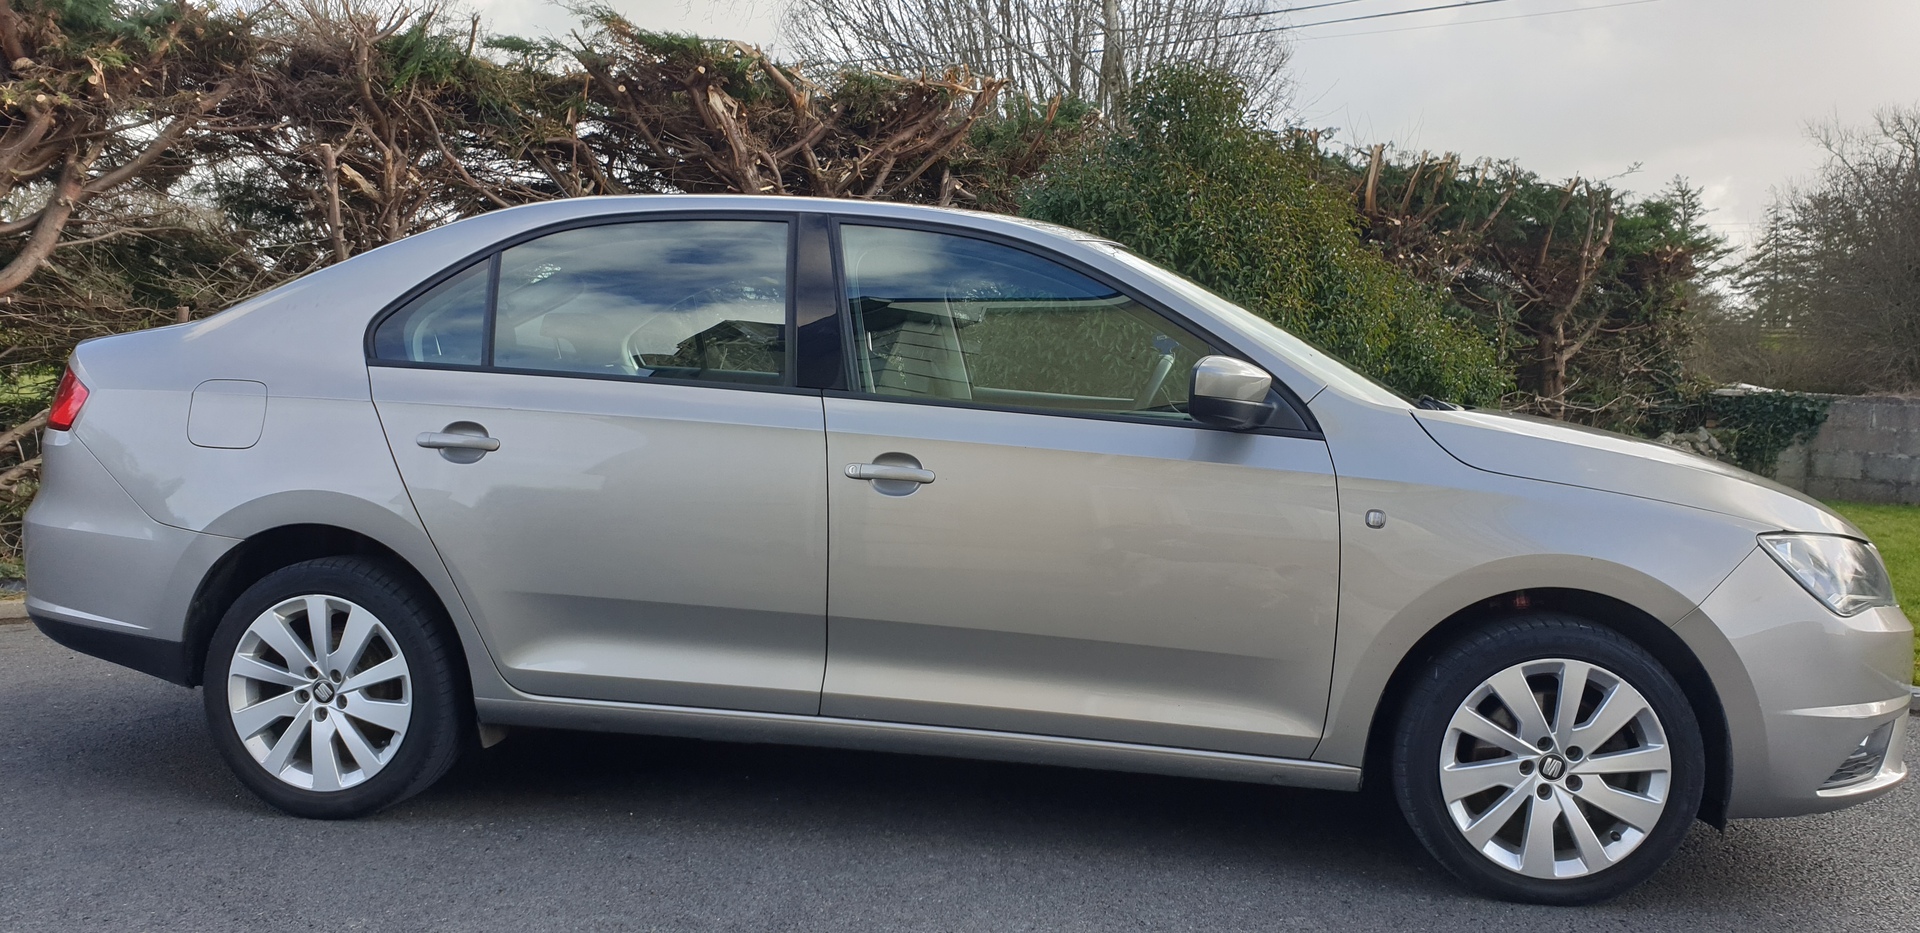 Used SEAT Toledo 2014 in Galway